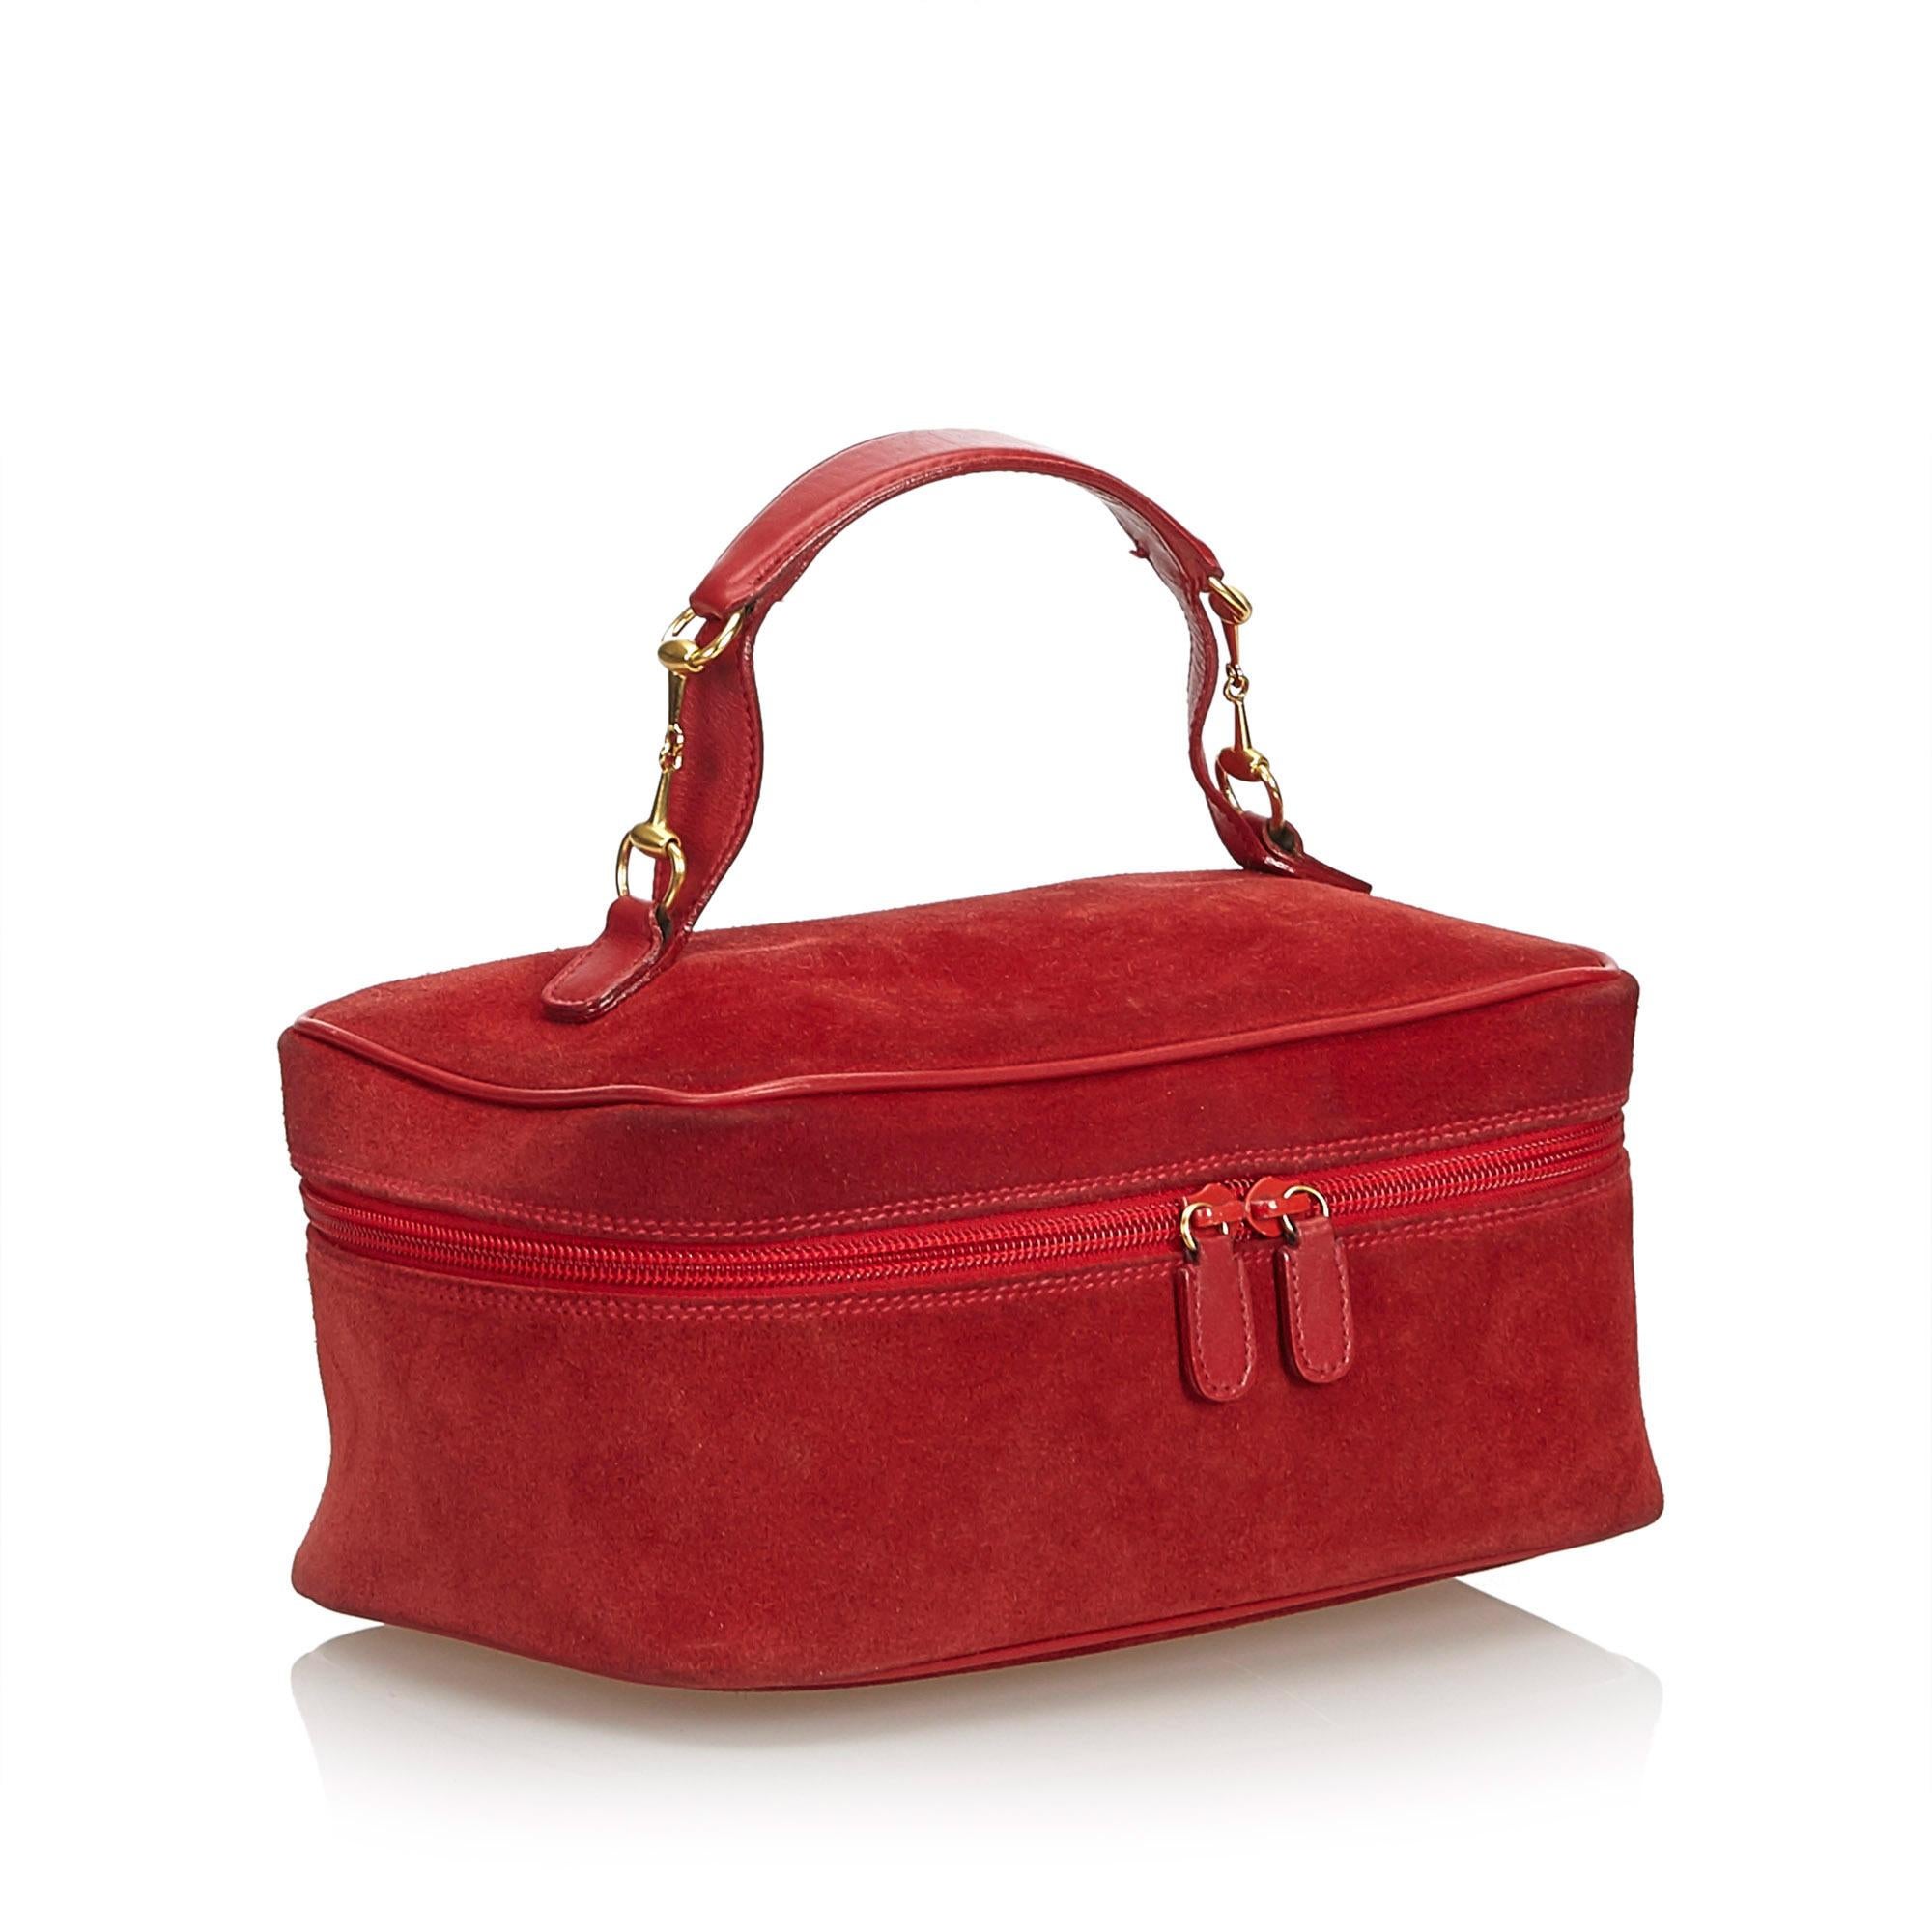 This vanity bag features a leather body, a top handle, and a top zip around closure. It carries as B condition rating.

Inclusions: 
This item does not come with inclusions.

Dimensions:
Length: 15.00 cm
Width: 10.00 cm
Depth: 13.00 cm
Hand Drop: